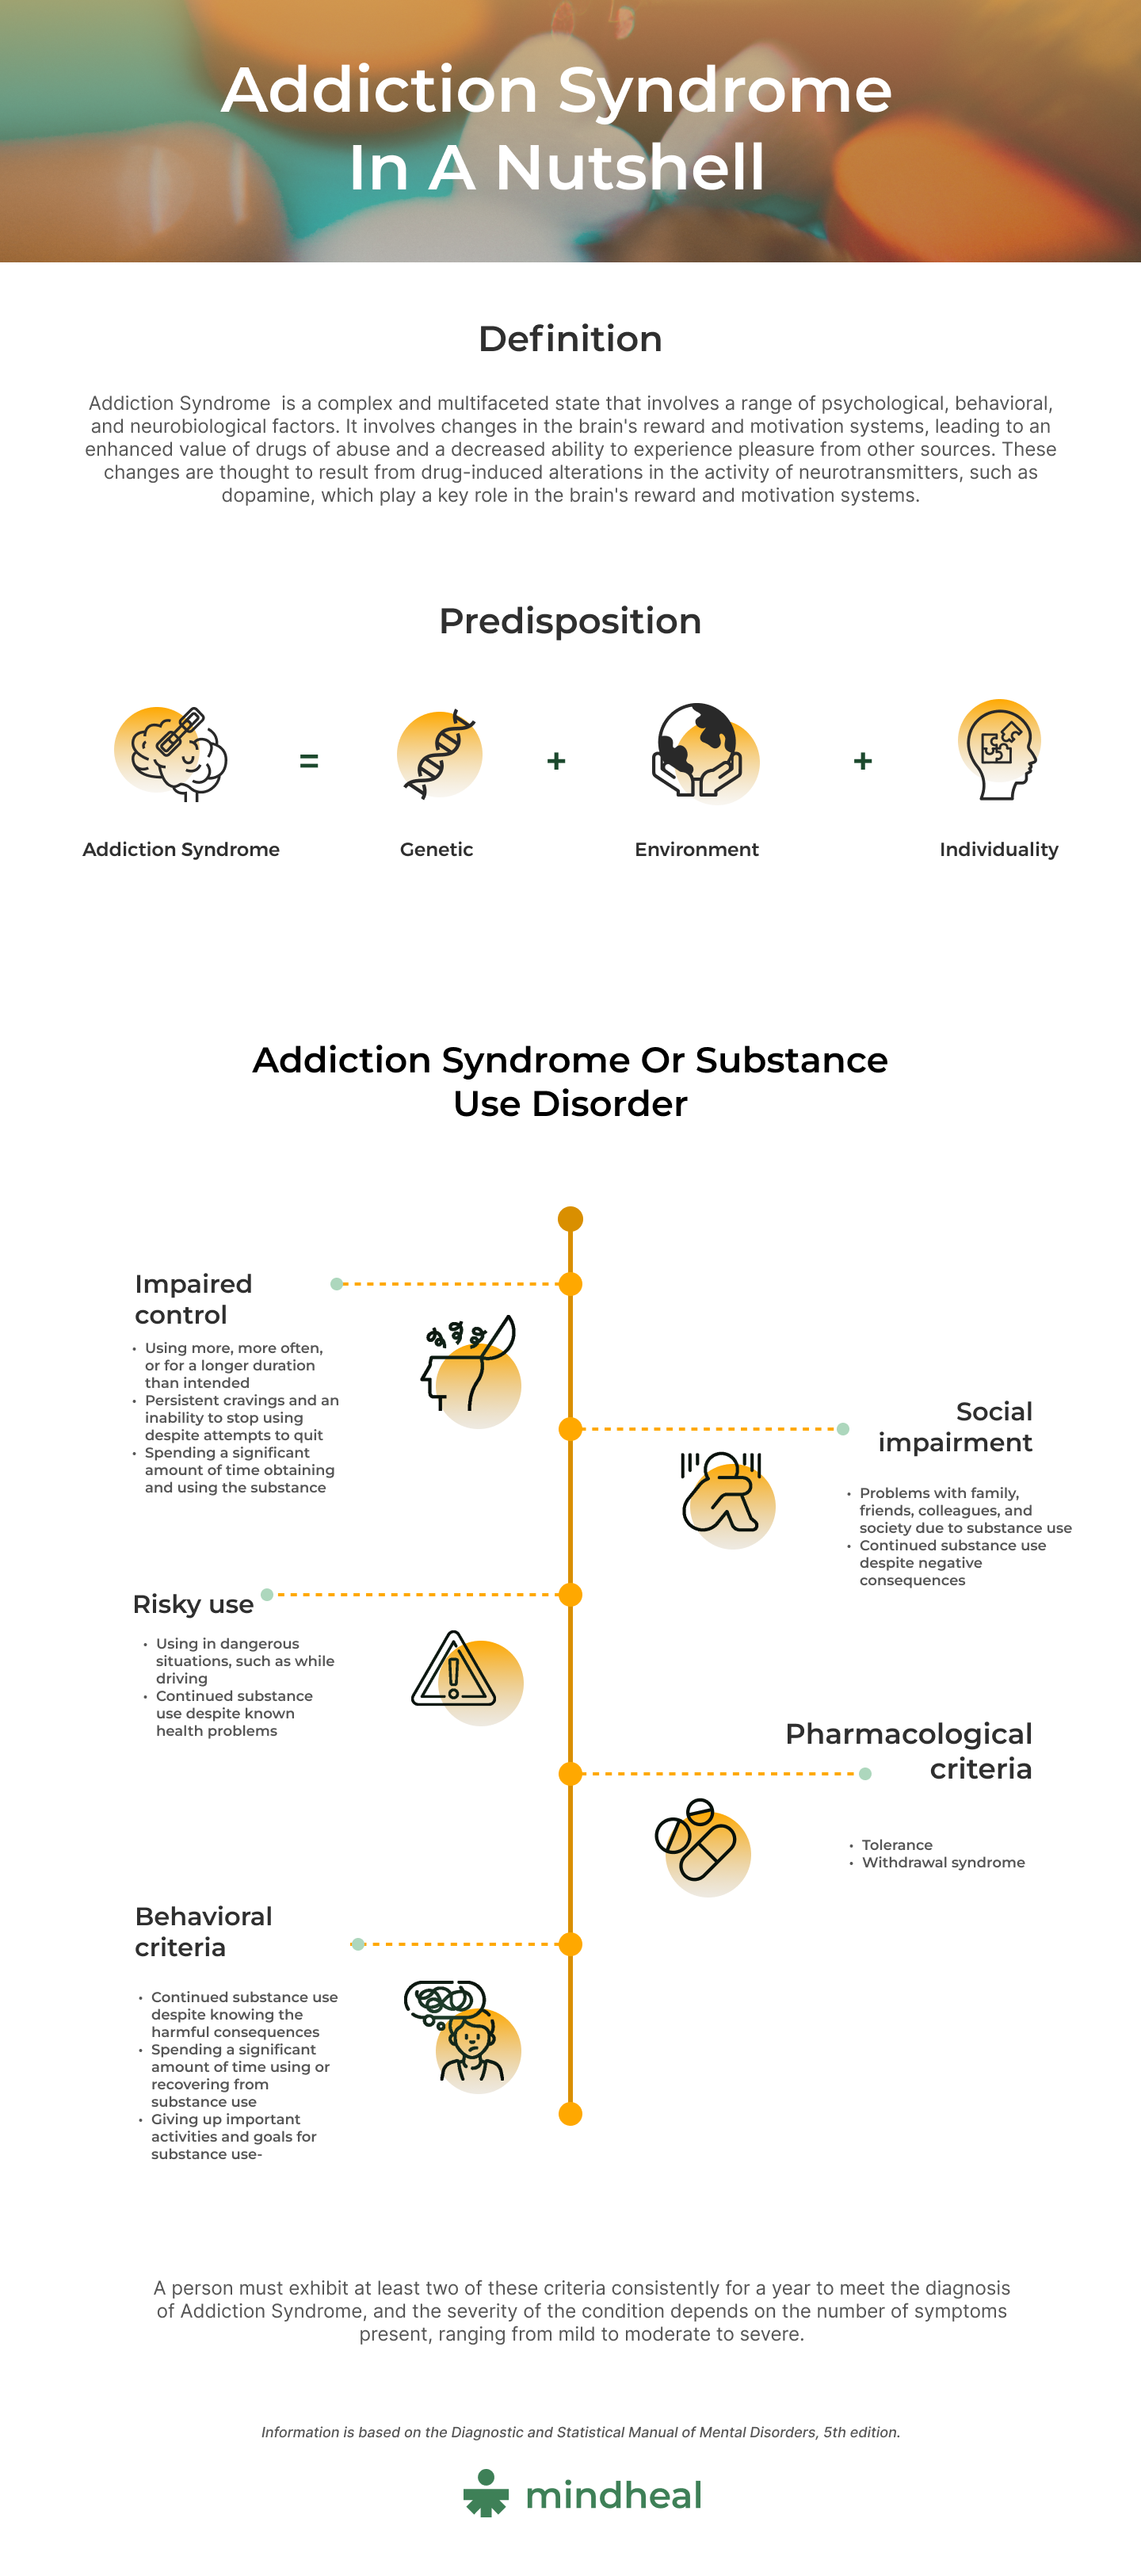 Addiction Syndrome In a Nutshell by mindheal